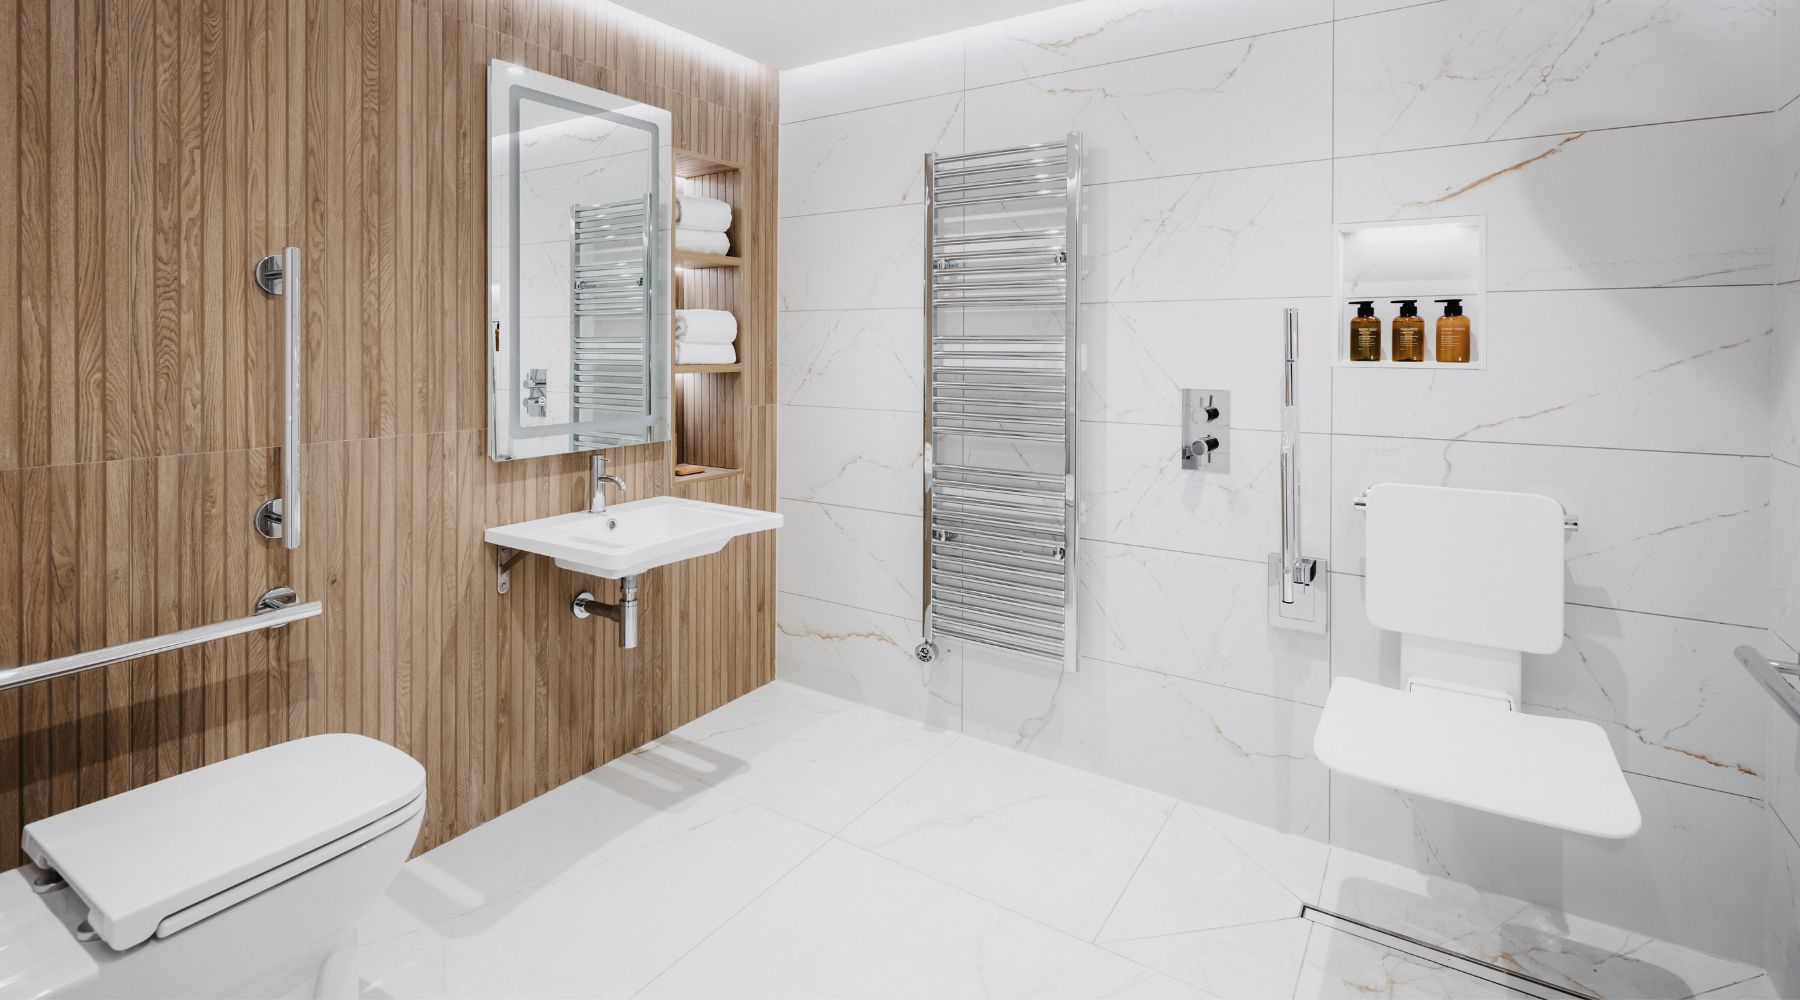 Luxury accessible bathroom with grab rails, wall mounted shower seat and basin, white marble tiles and natural wood panelling 